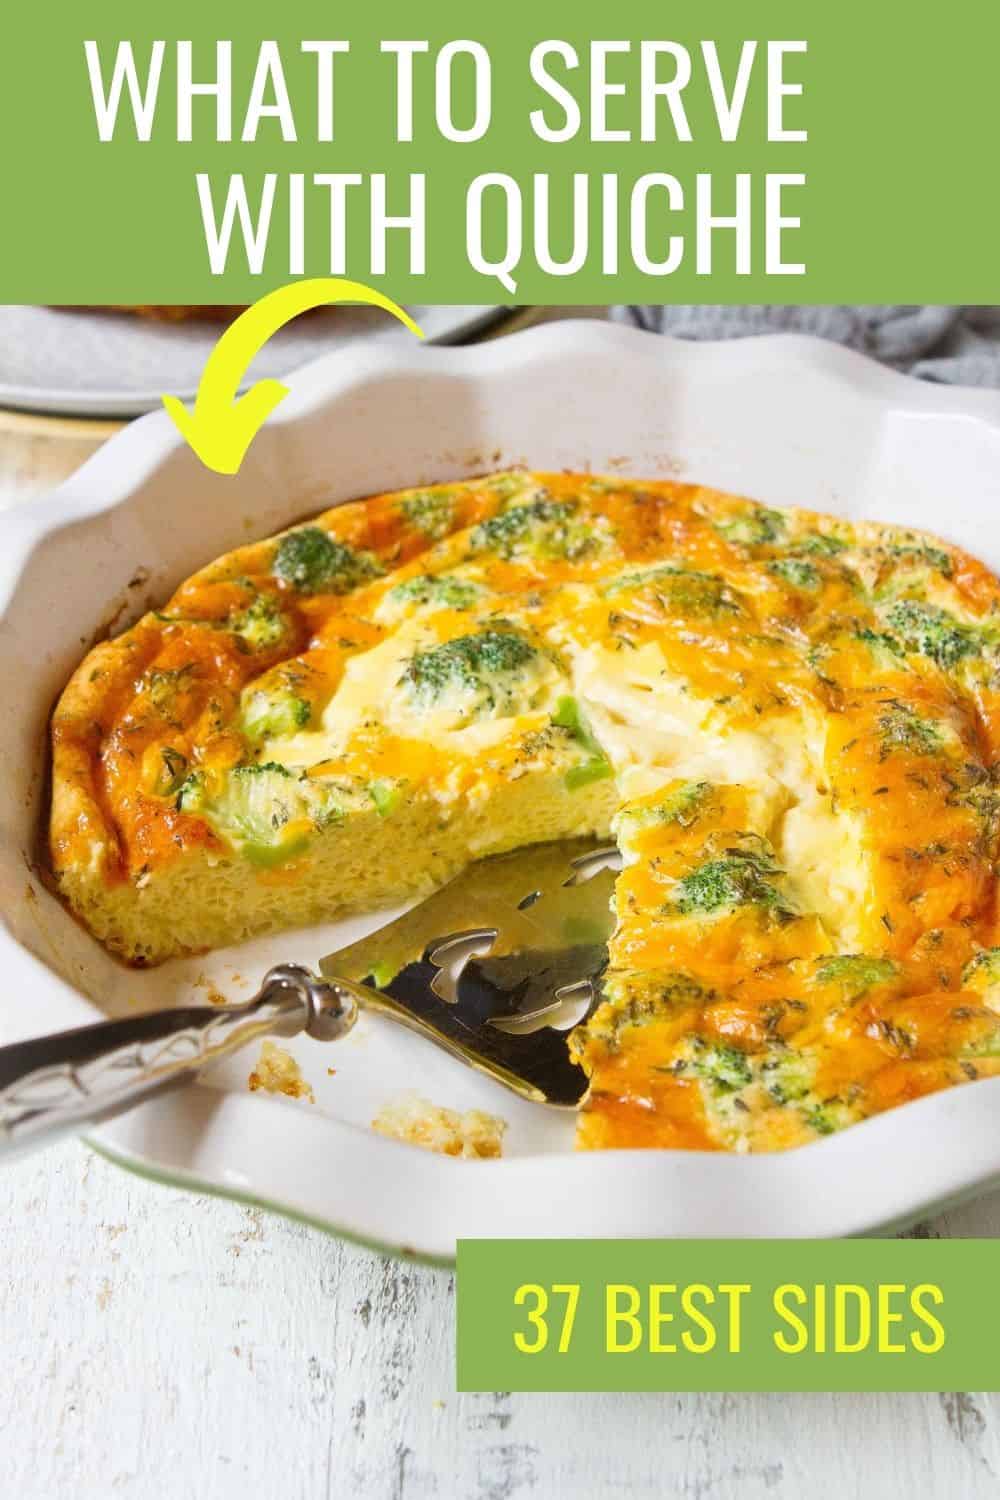 Whether serving quiche for brunch or dinner, you never need to need to wonder what to serve with quiche. This amazing list of best sides for quiche includes both sweet and savory recipes to please all of your guests!